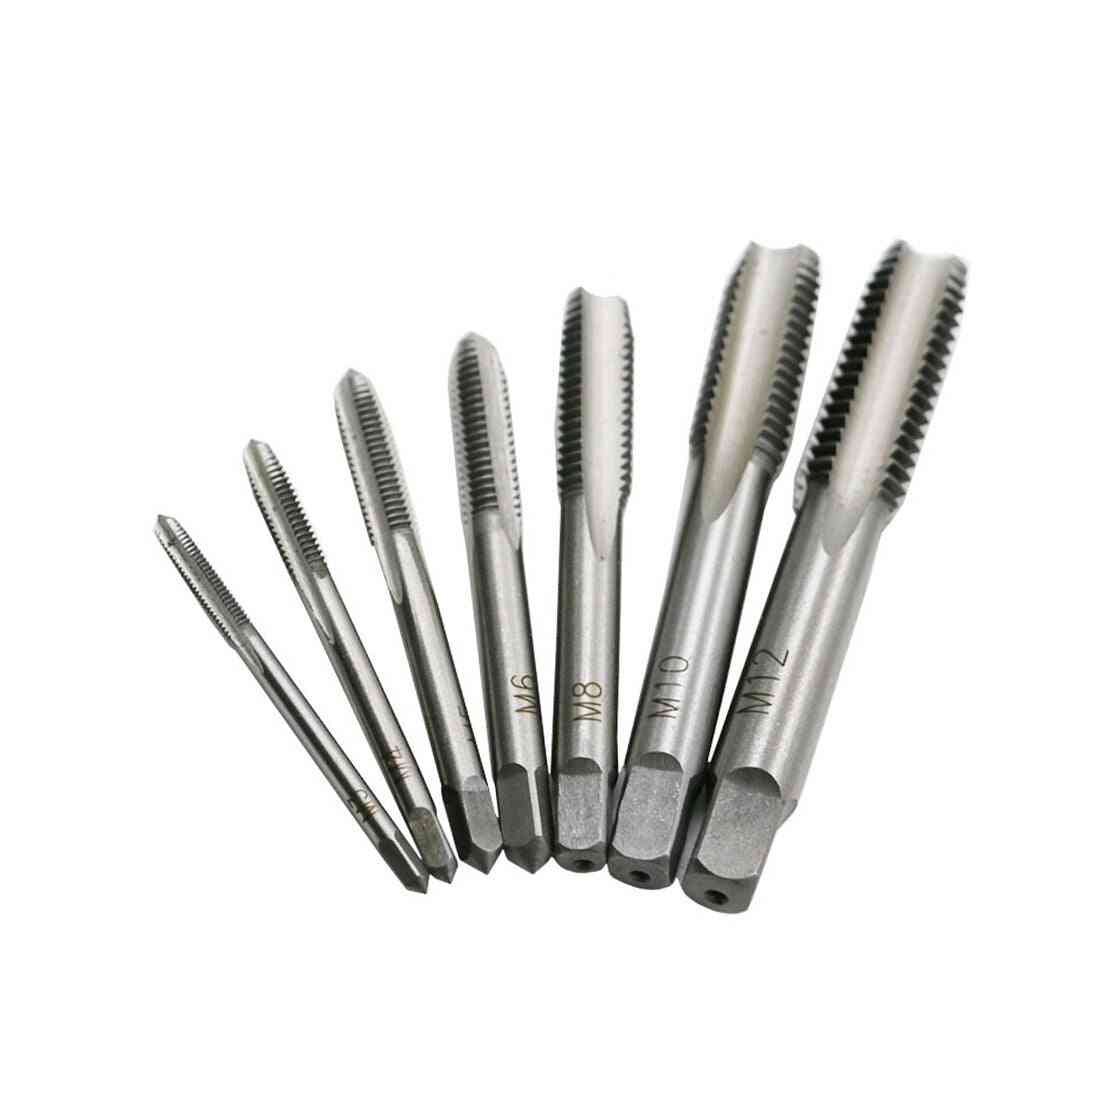 High Quality Bearing Steel Taper Machine Spiral Point Straight Fluted Screw